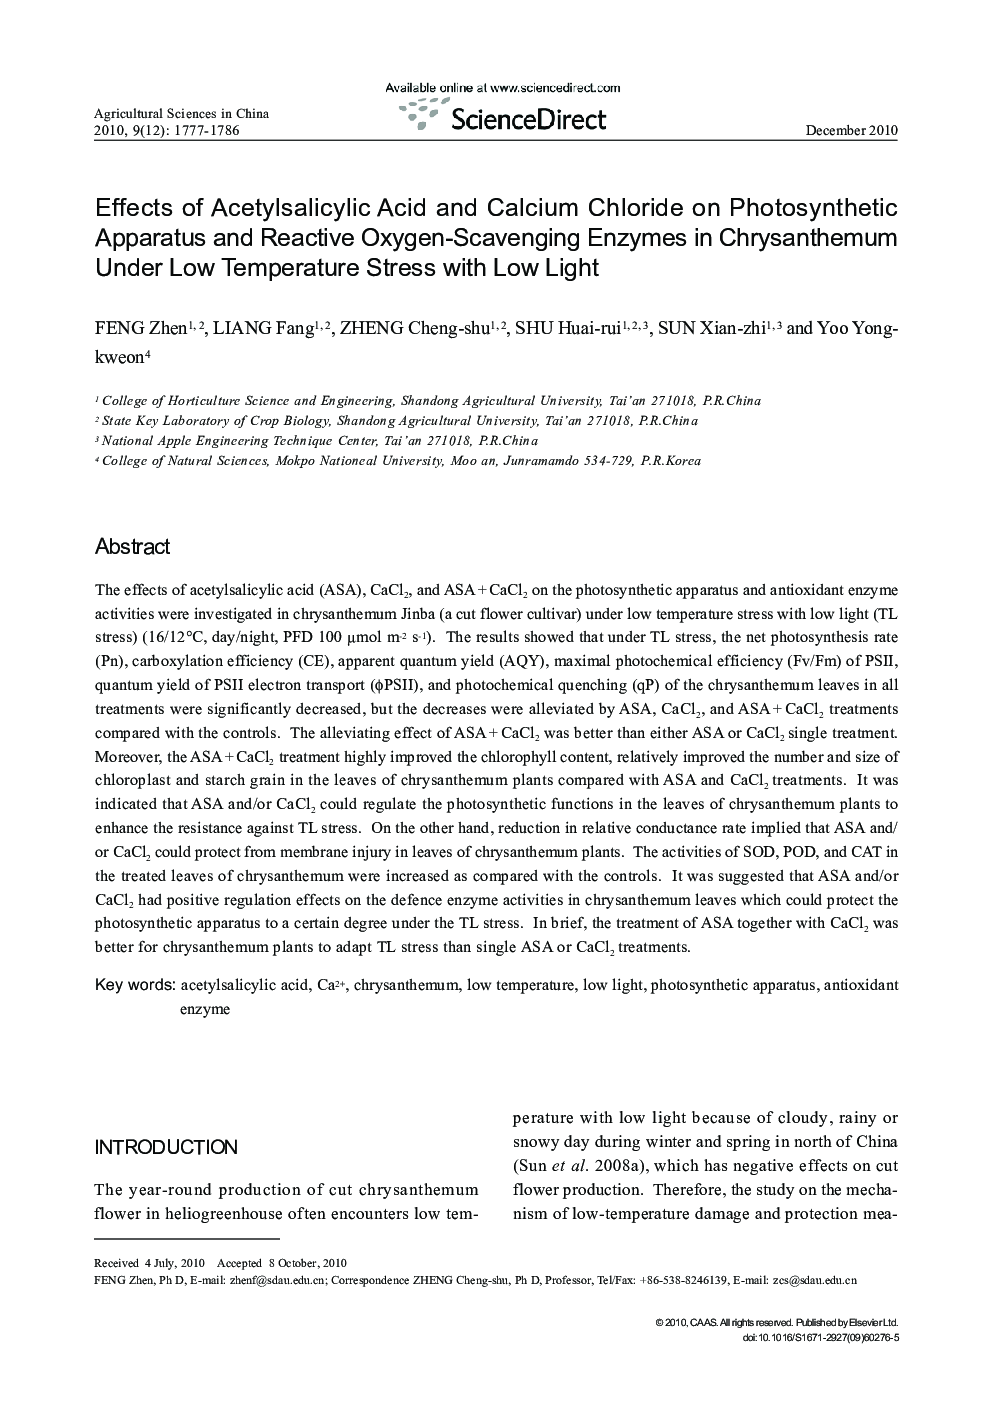 Effects of Acetylsalicylic Acid and Calcium Chloride on Photosynthetic Apparatus and Reactive Oxygen-Scavenging Enzymes in Chrysanthemum Under Low Temperature Stress with Low Light